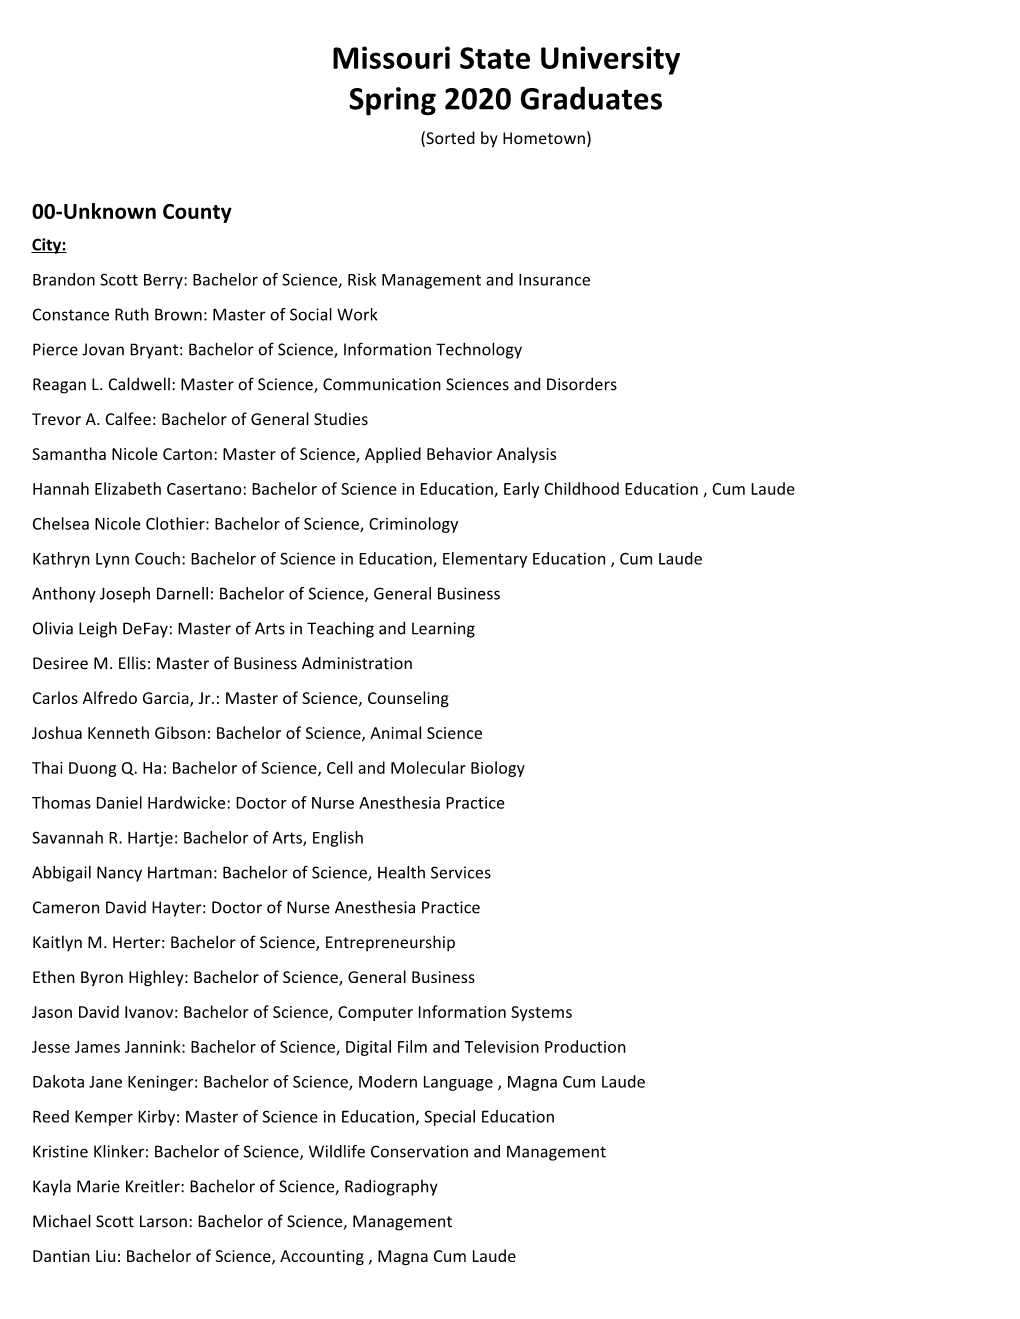 Missouri State University Spring 2020 Graduates (Sorted by Hometown)